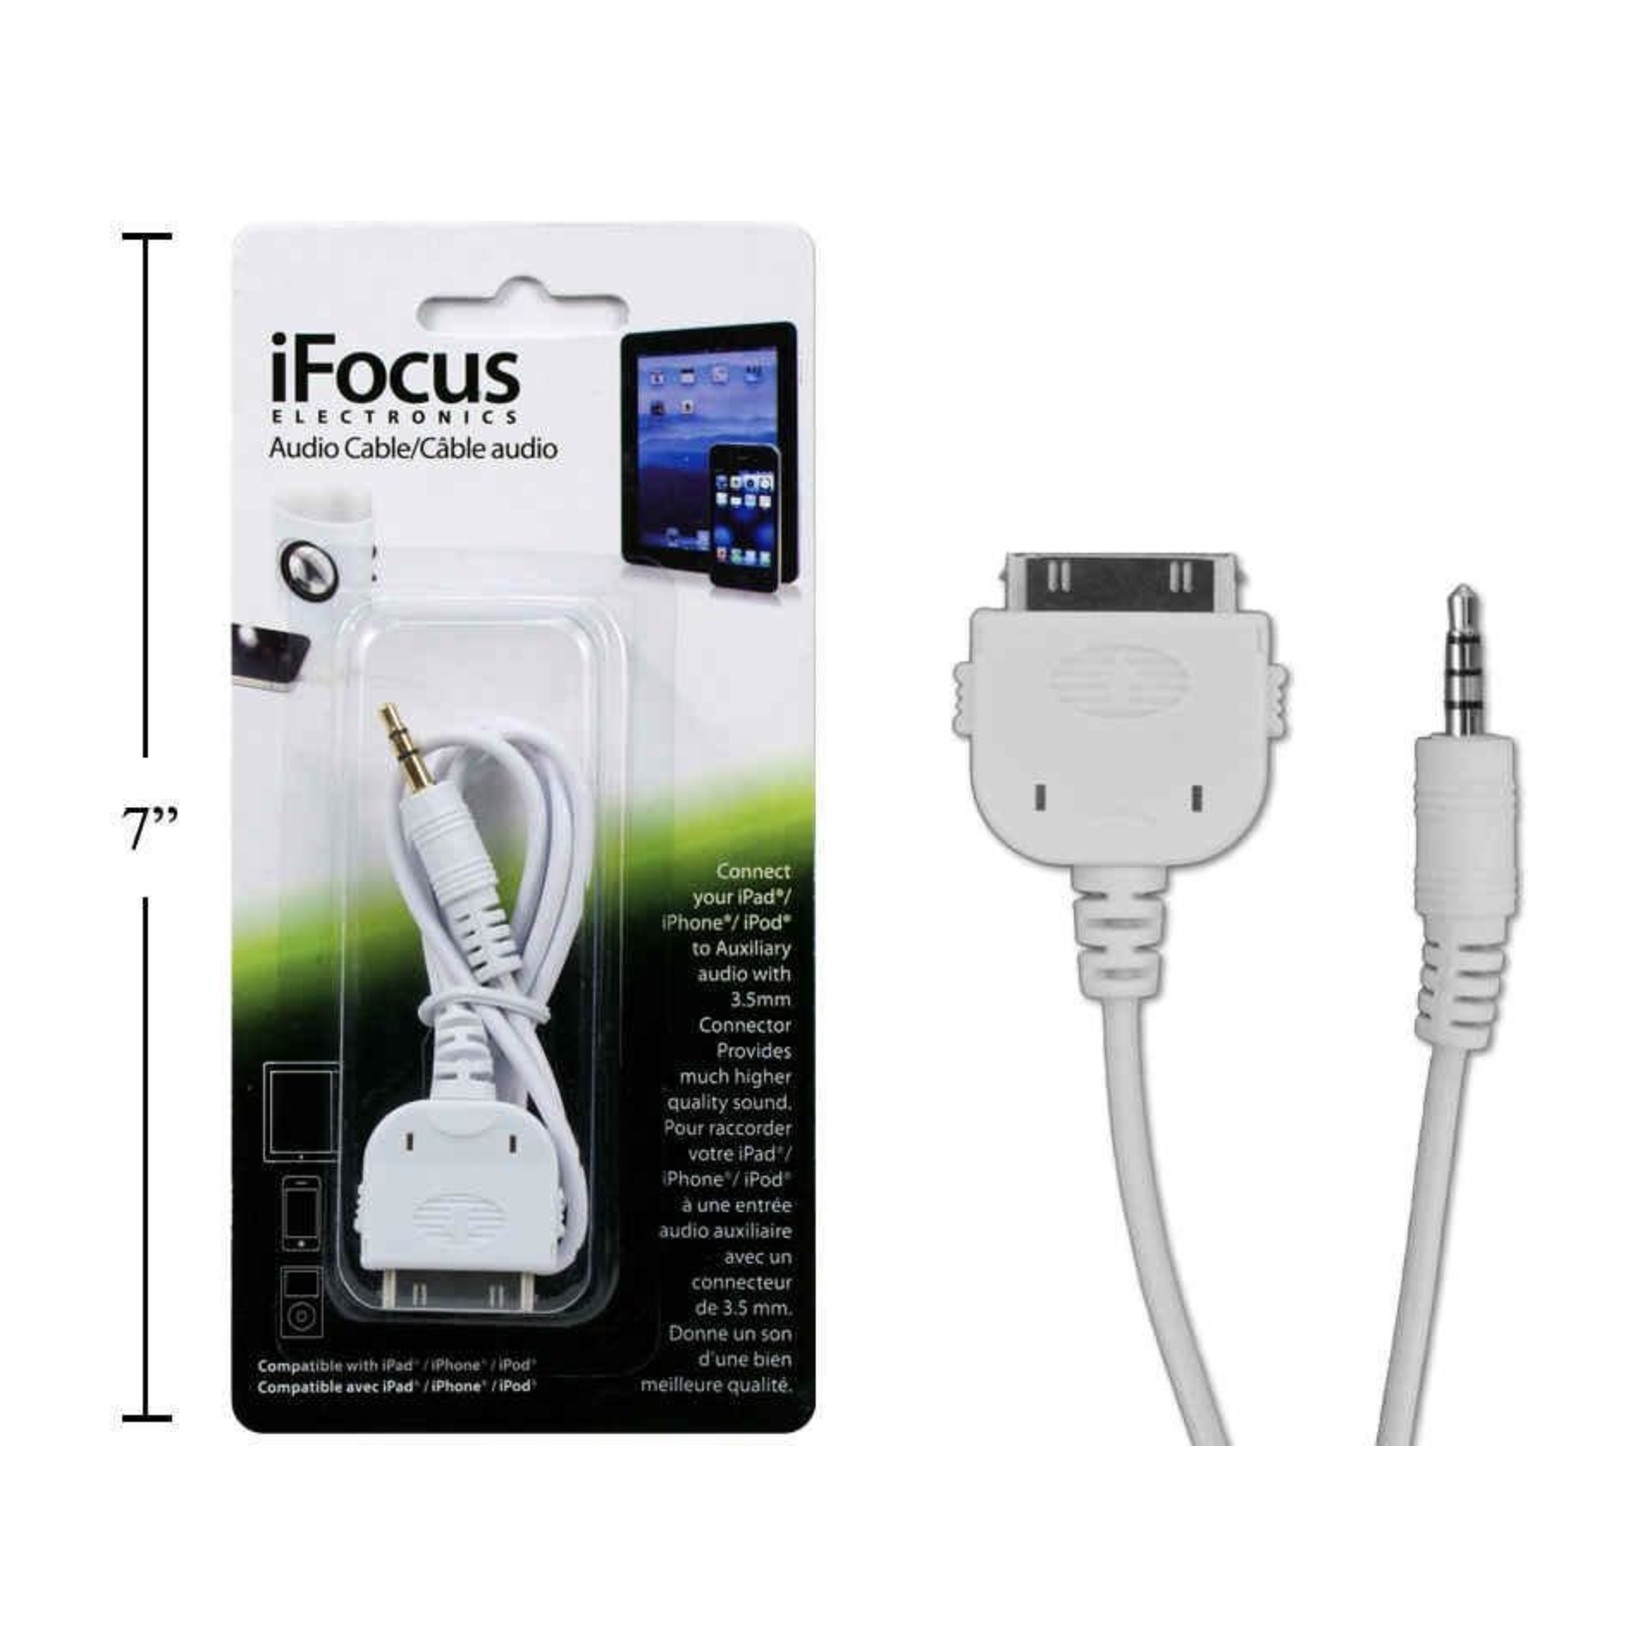 3.3FT AUDIO CABLE FOR IPAD/IPHONE/IPOD, B.c